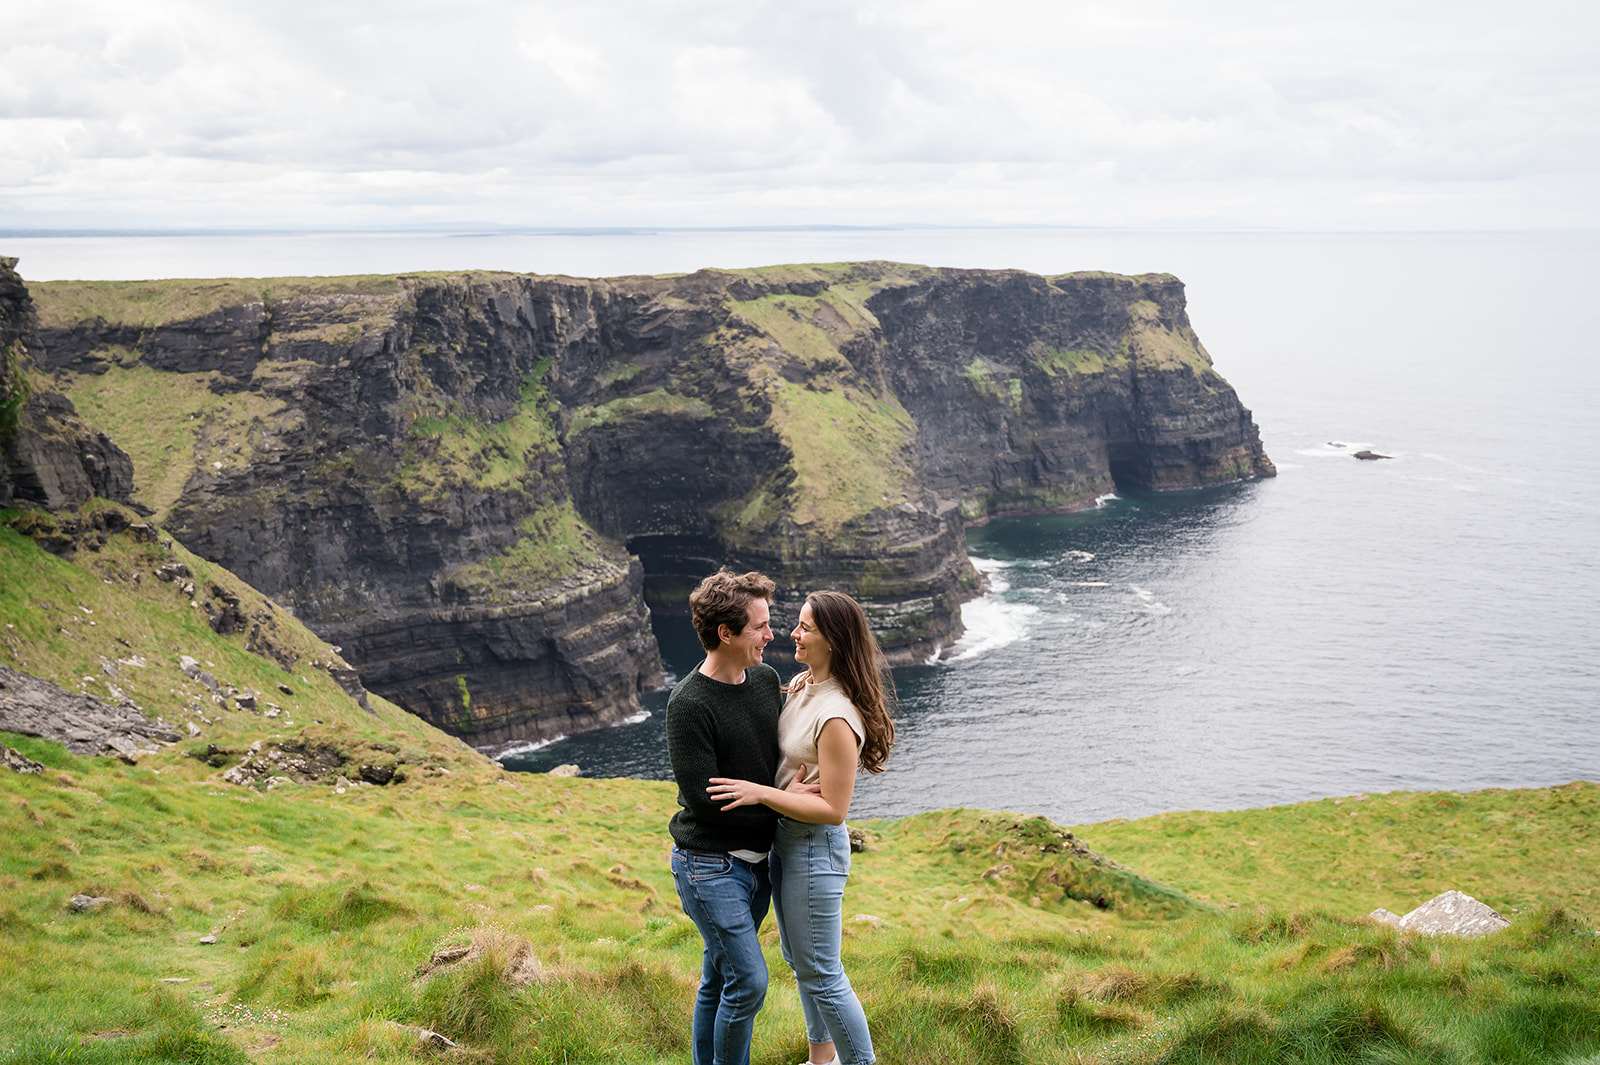 Engaged at The Cliffs of Moher